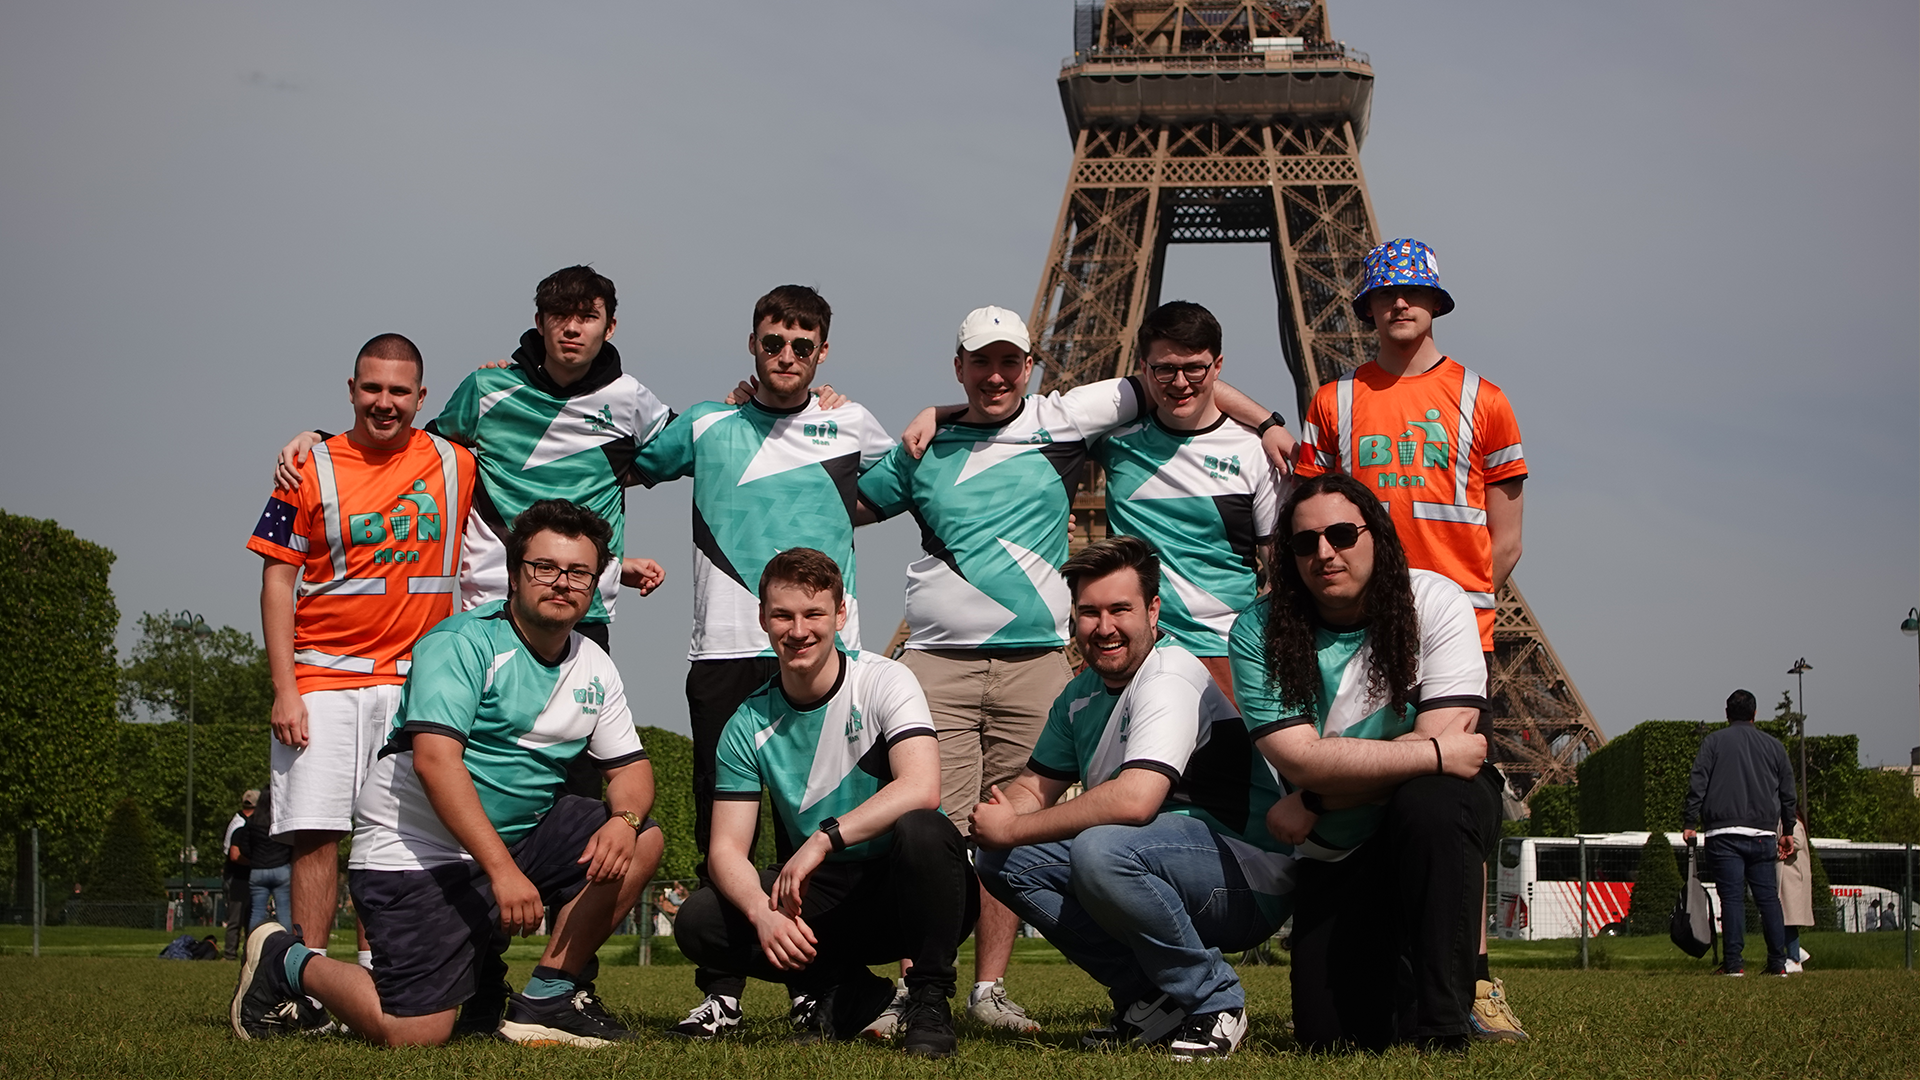 The Binmen with their arms around each other in front of the Eiffel Tower.